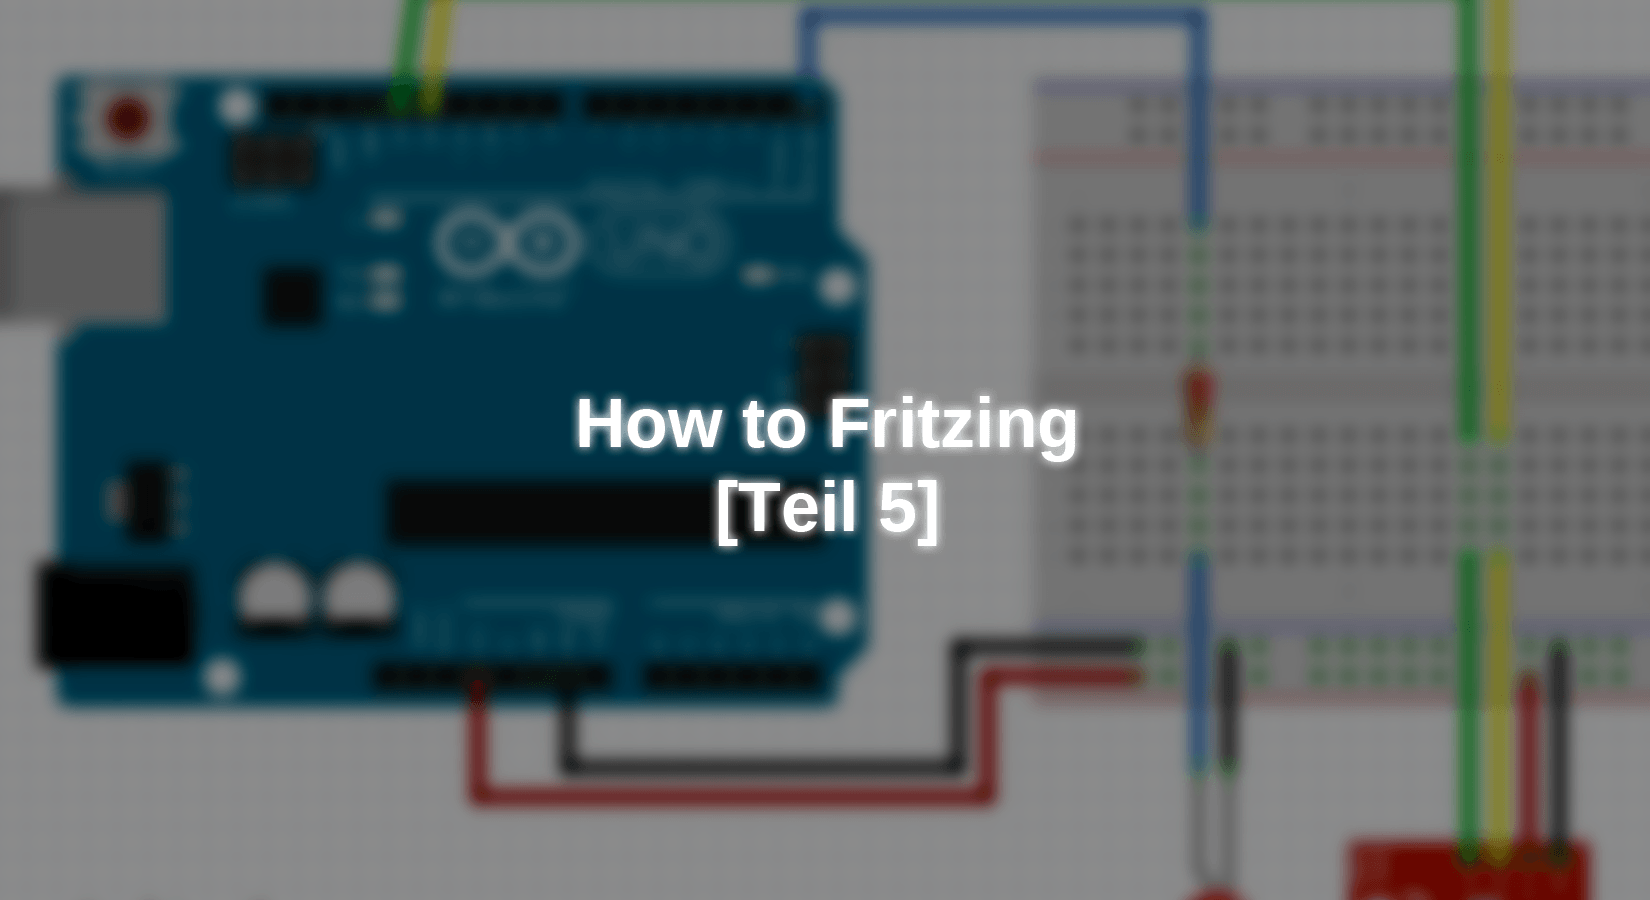 How To Fritzing - [Teil 5] - AZ-Delivery